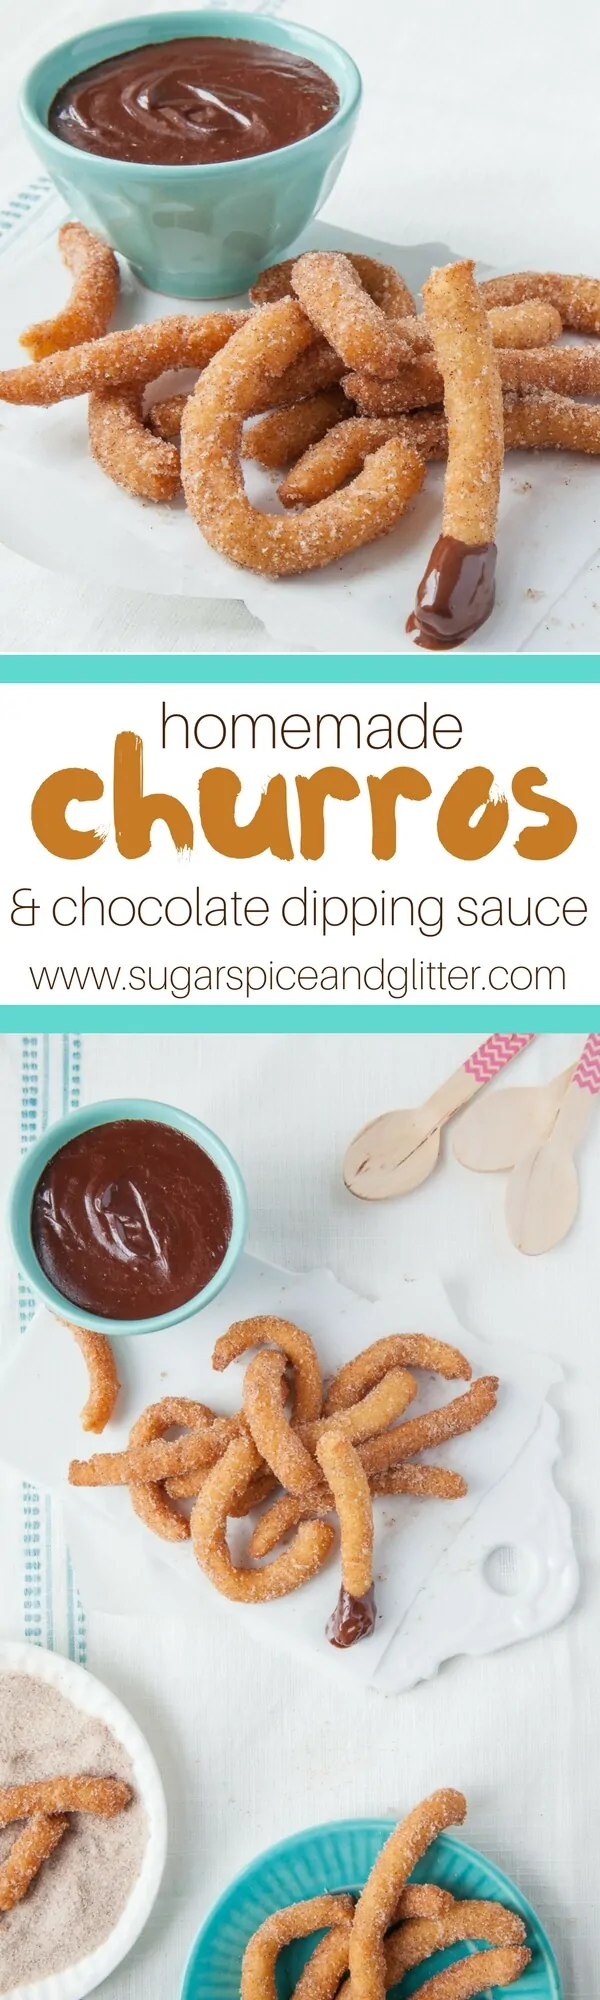 Homemade Churros with Chocolate Dipping Sauce, the perfect DIY carnival or fair food for a summer party